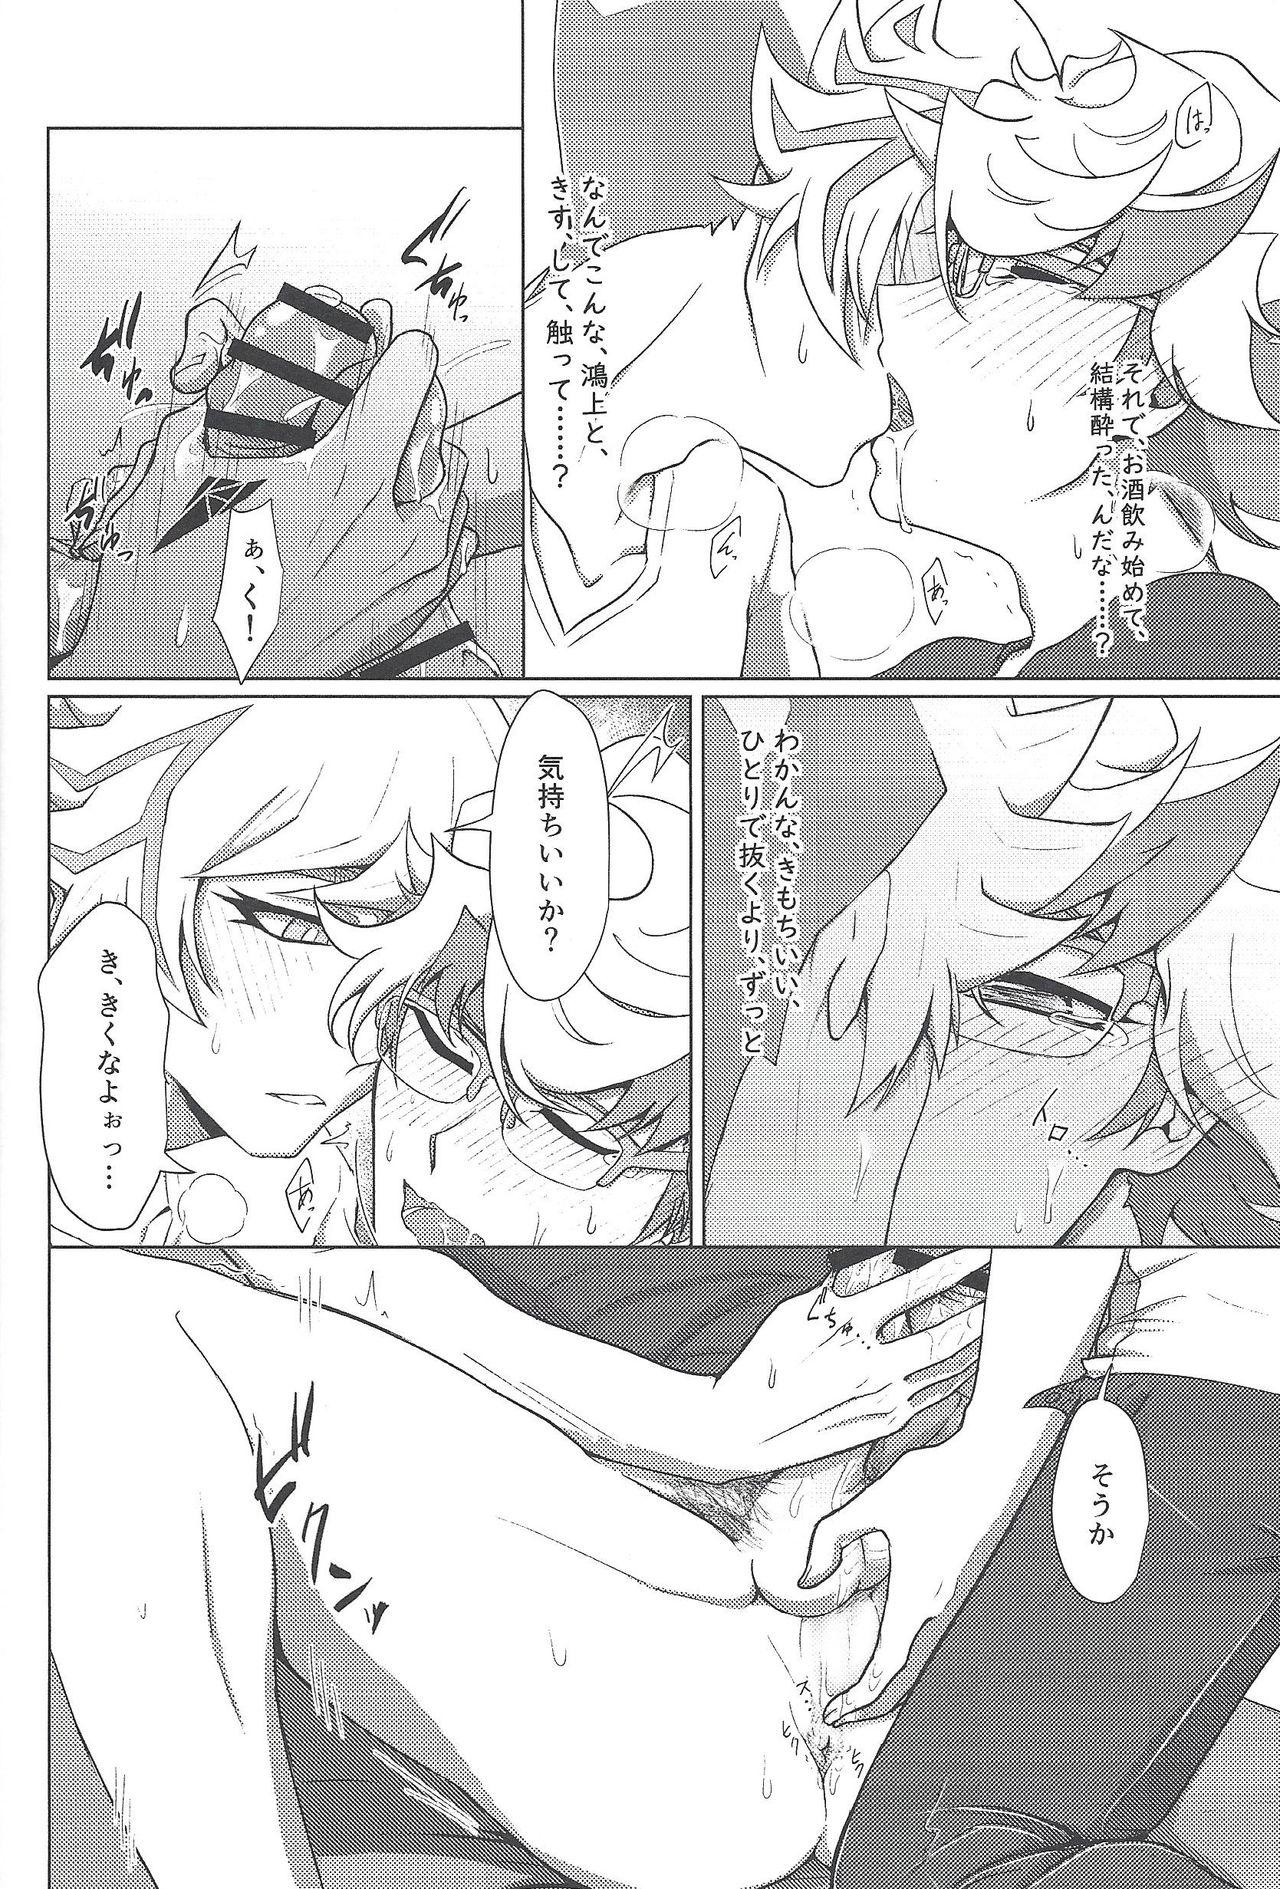 Whores Meitei Sex no Susume - Yu-gi-oh vrains Virginity - Page 5